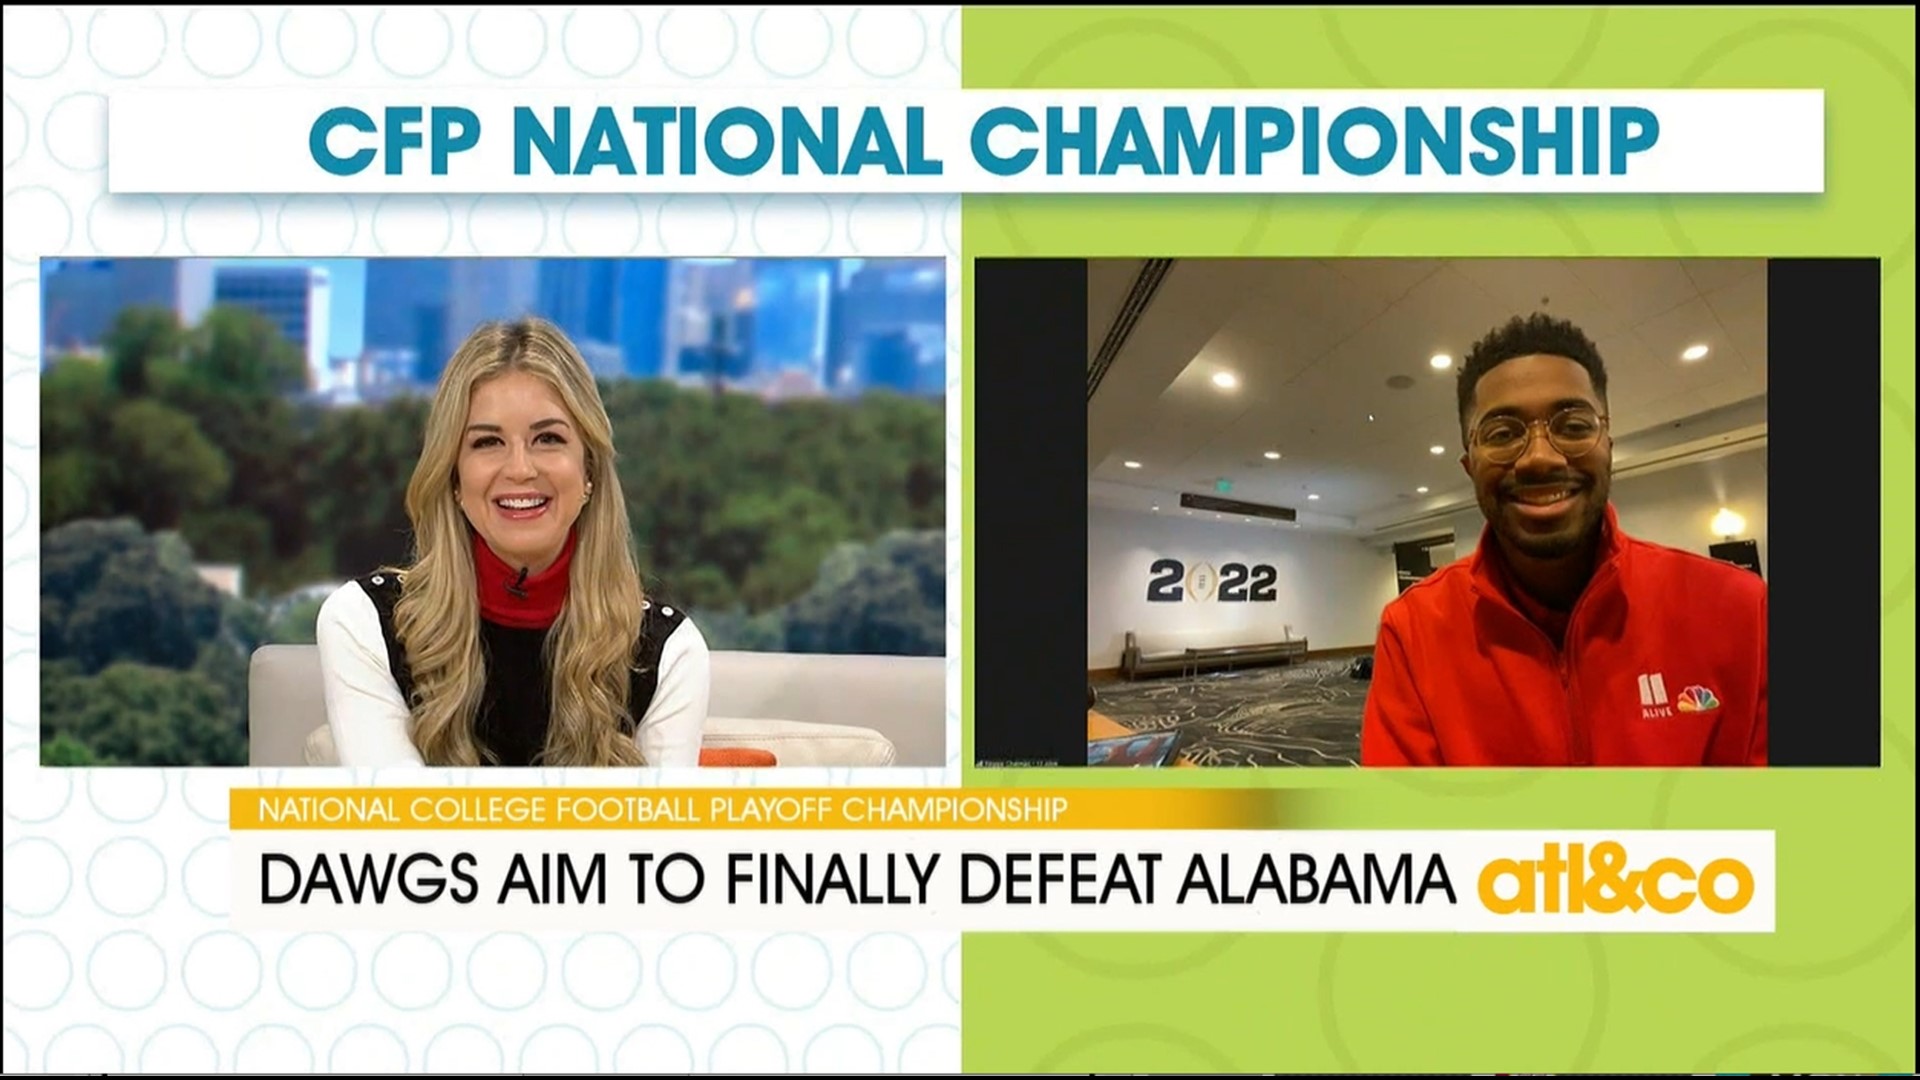 11Alive Sports' Reggie Chatman joins Cara Kneer from Indianapolis with a preview of tonight's big game between Georgia and Alabama.